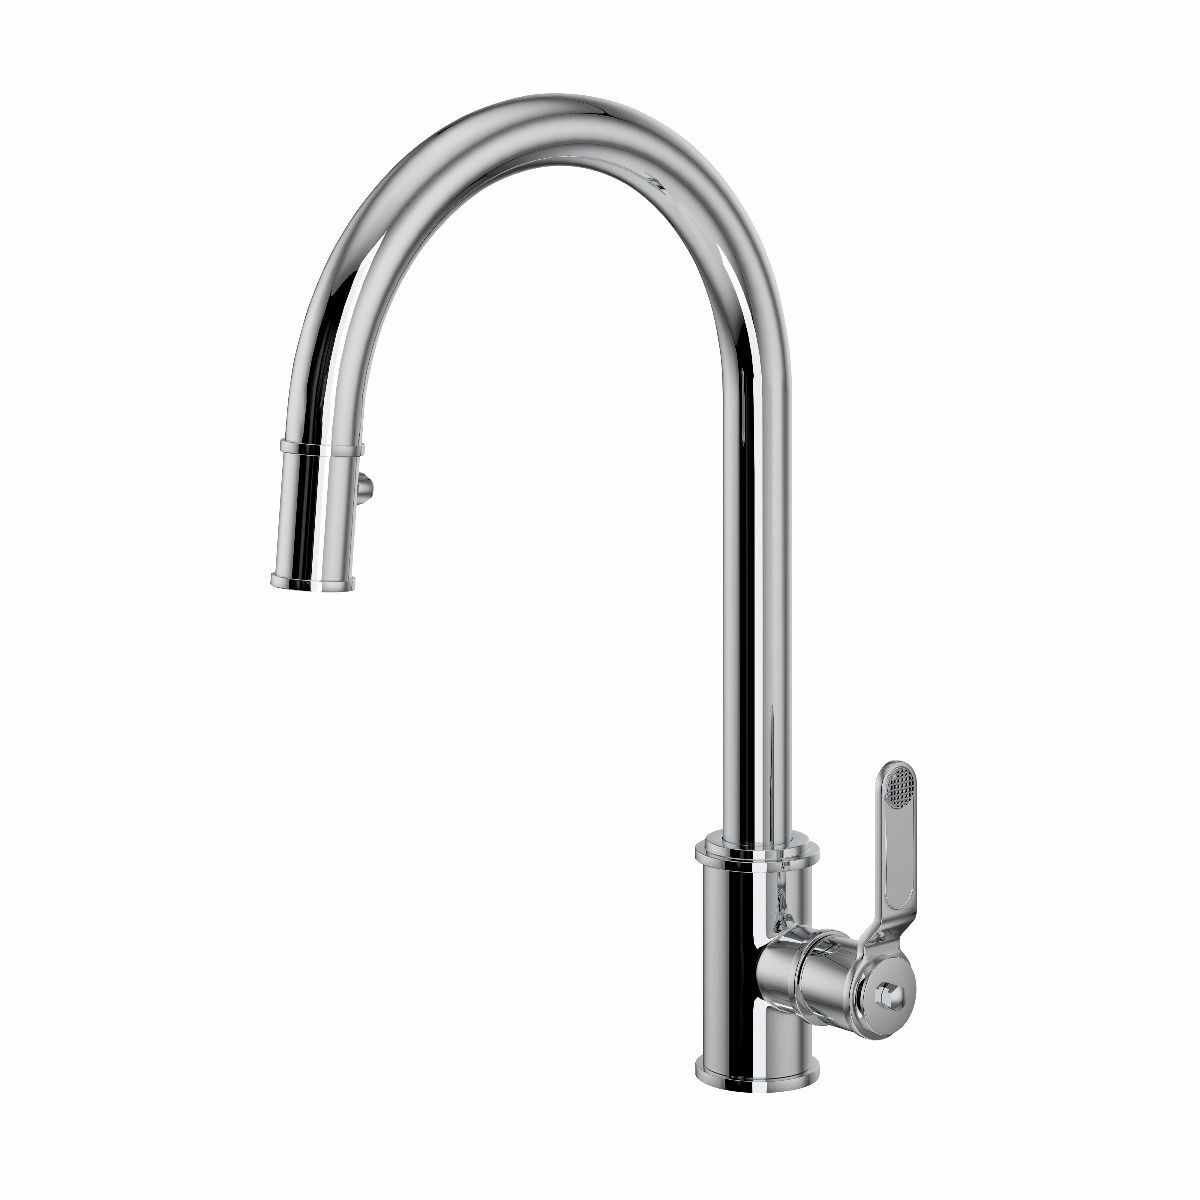 An image of Perrin & Rowe Armstrong 4544HT Single Lever Mixer with Pull Down Rinse with Text...